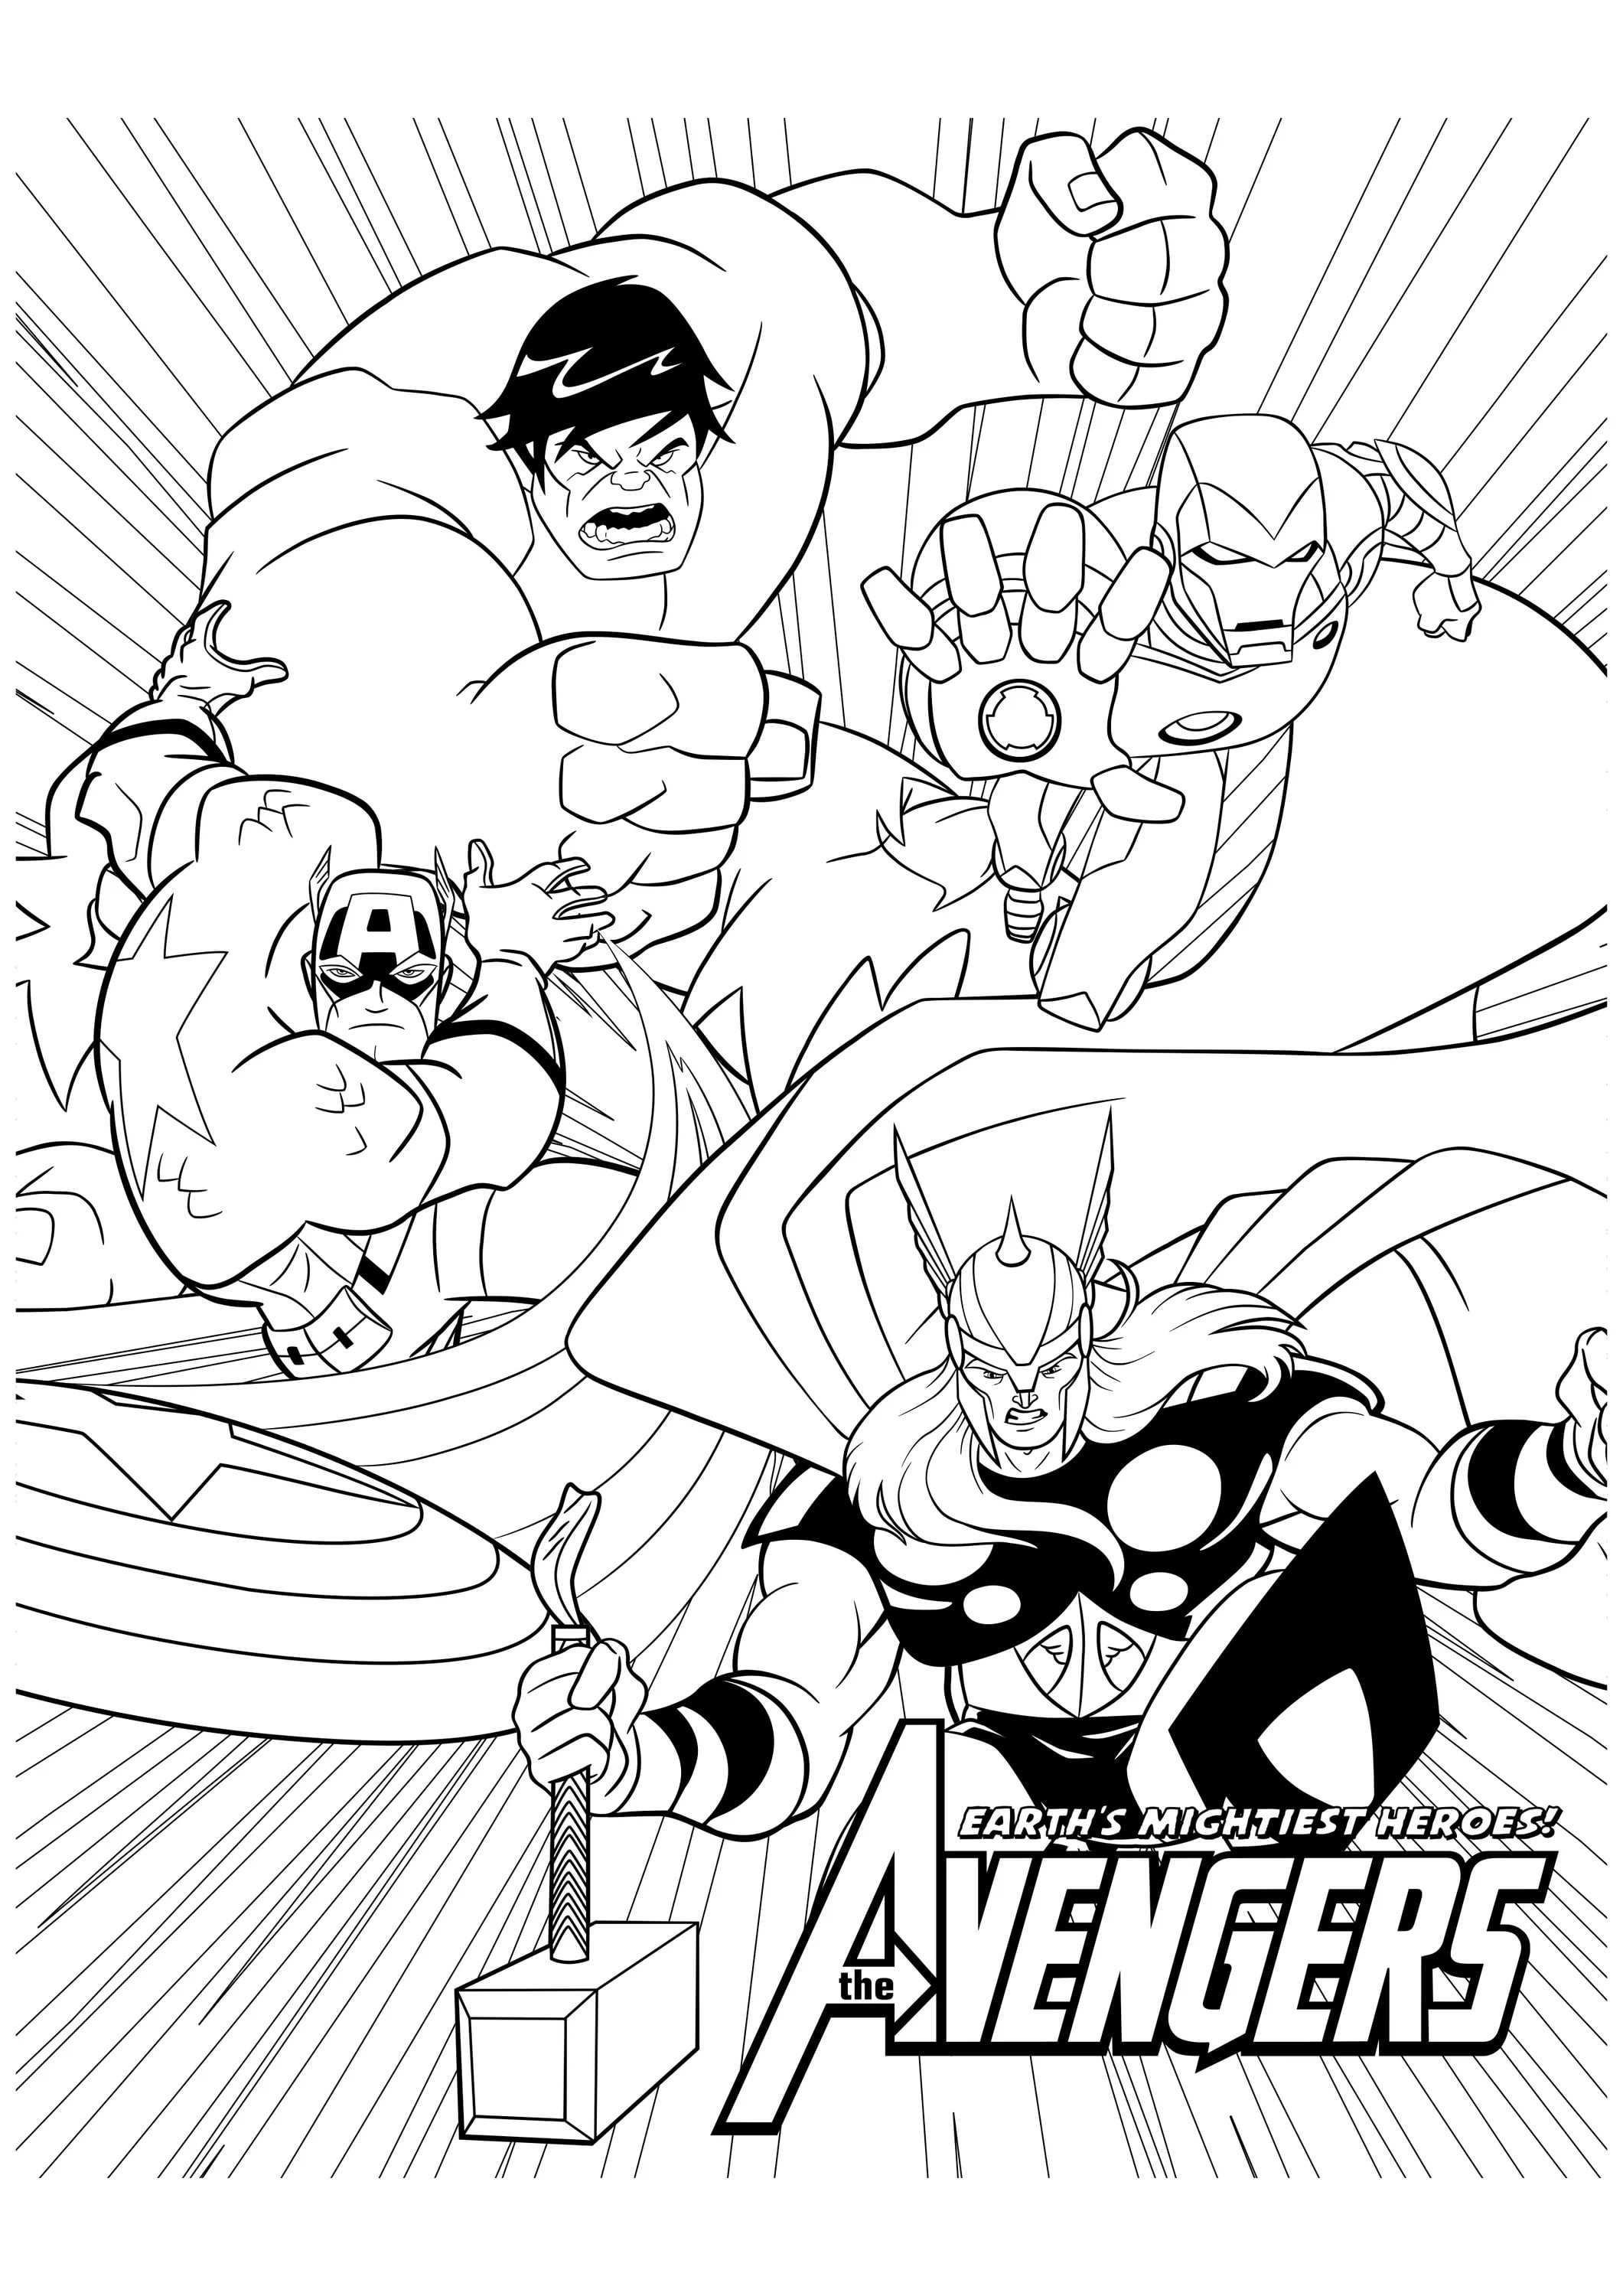 Avengers 11  coloring page to print and coloring